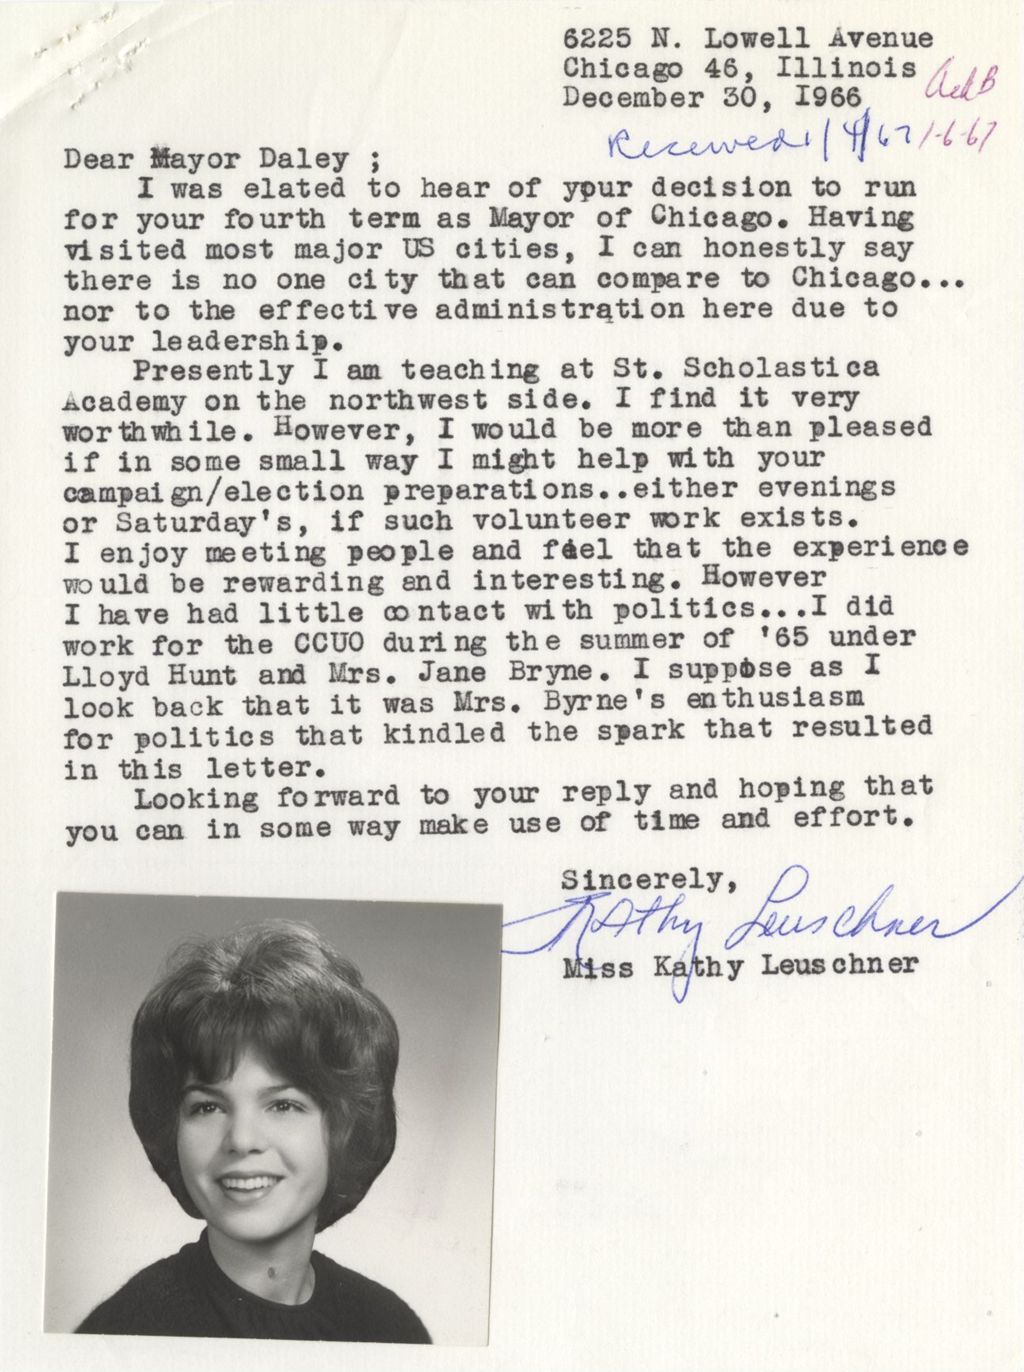 Letter to Richard J. Daley from Kathy Leuschner